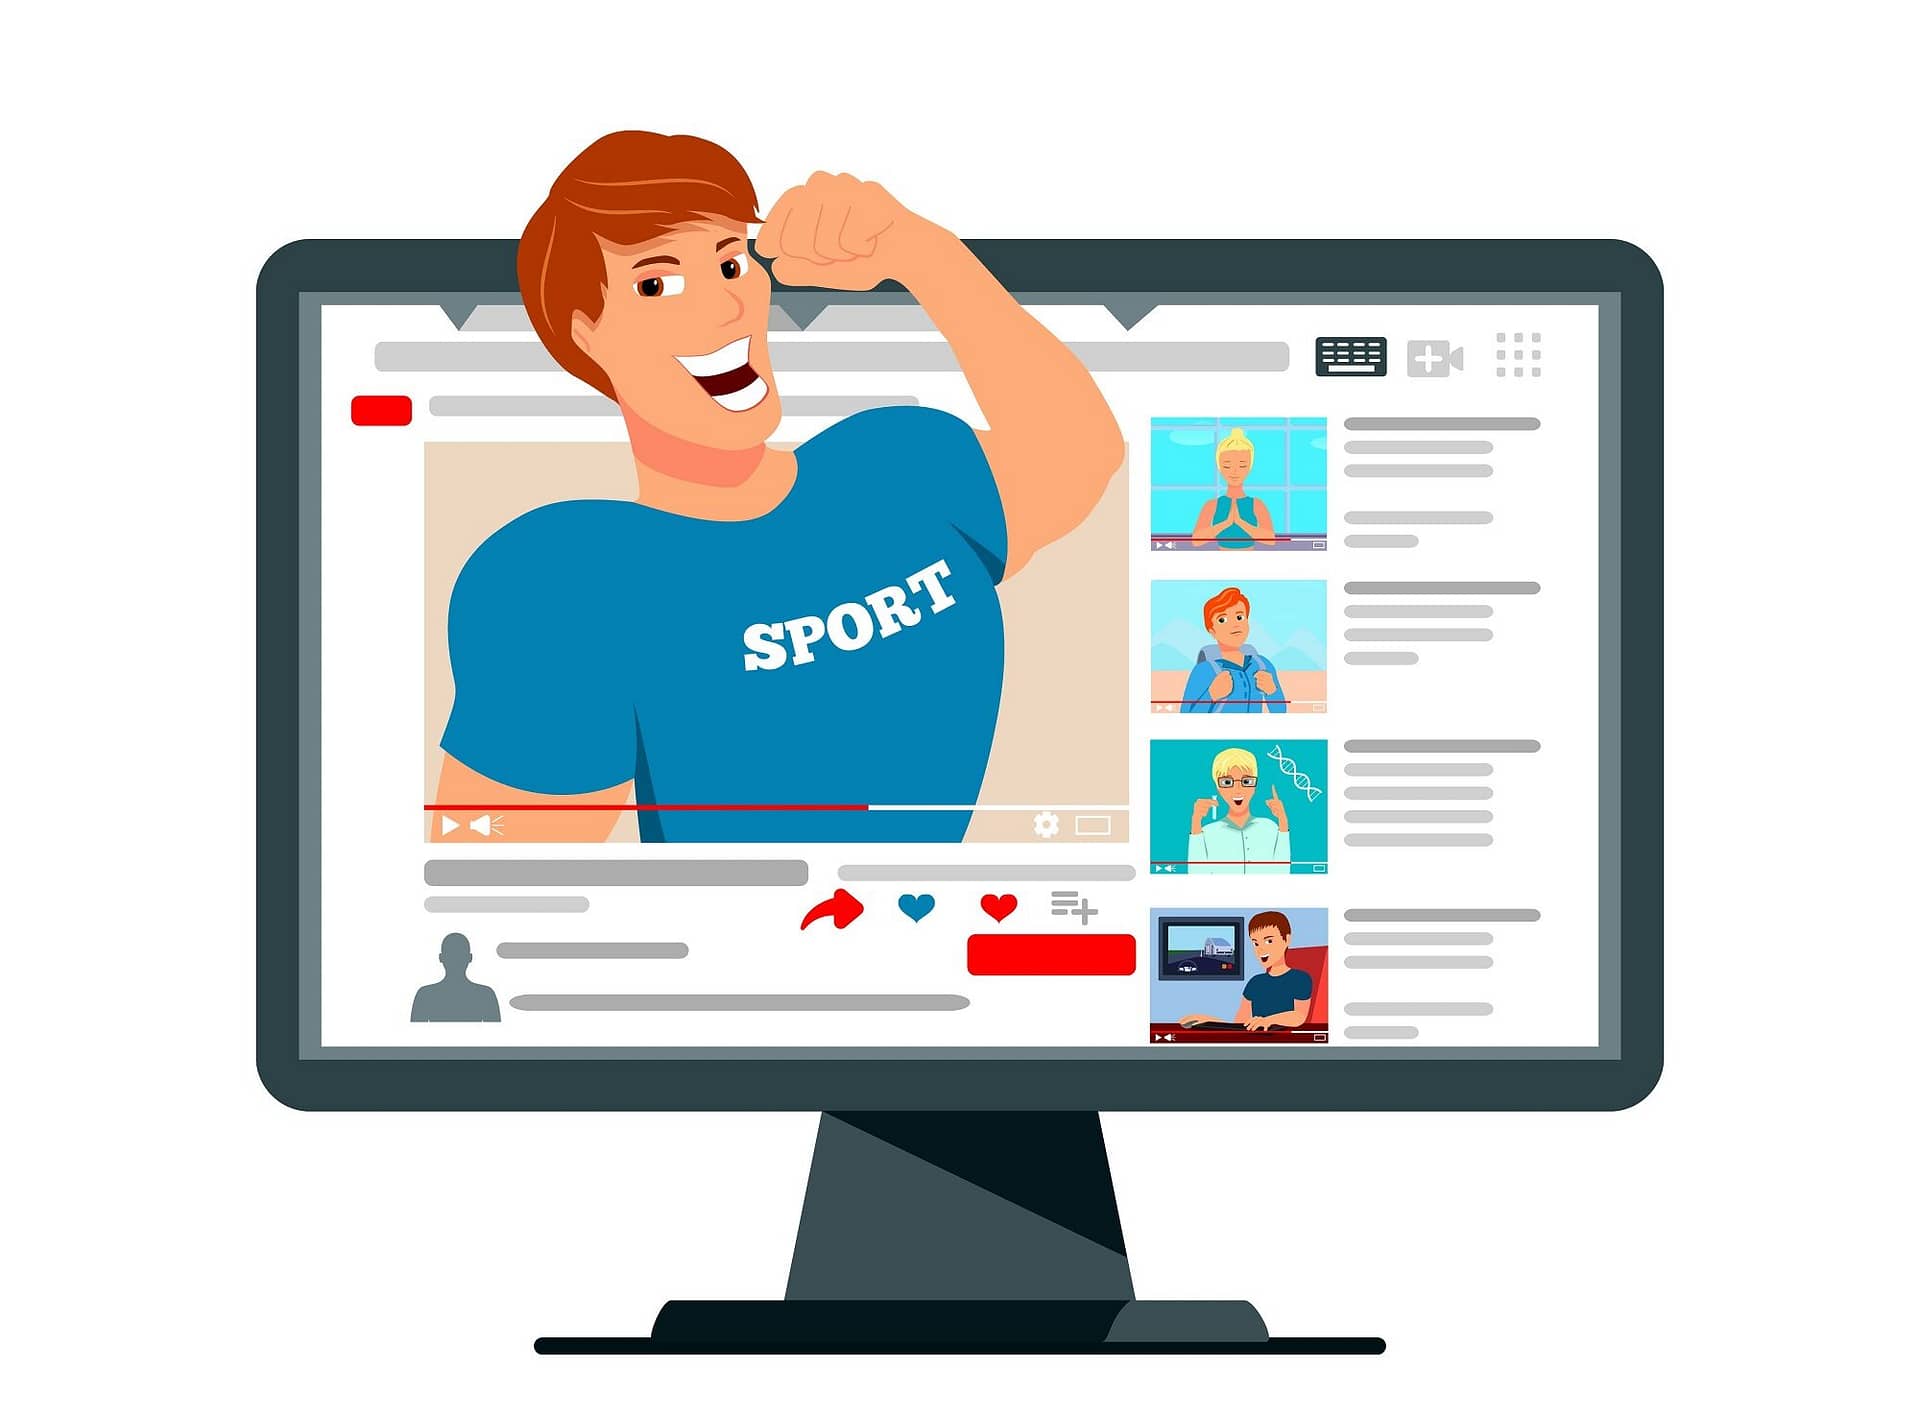 Video blogging popular sport author character popping out of computer screen flat advertisement website header vector illustration